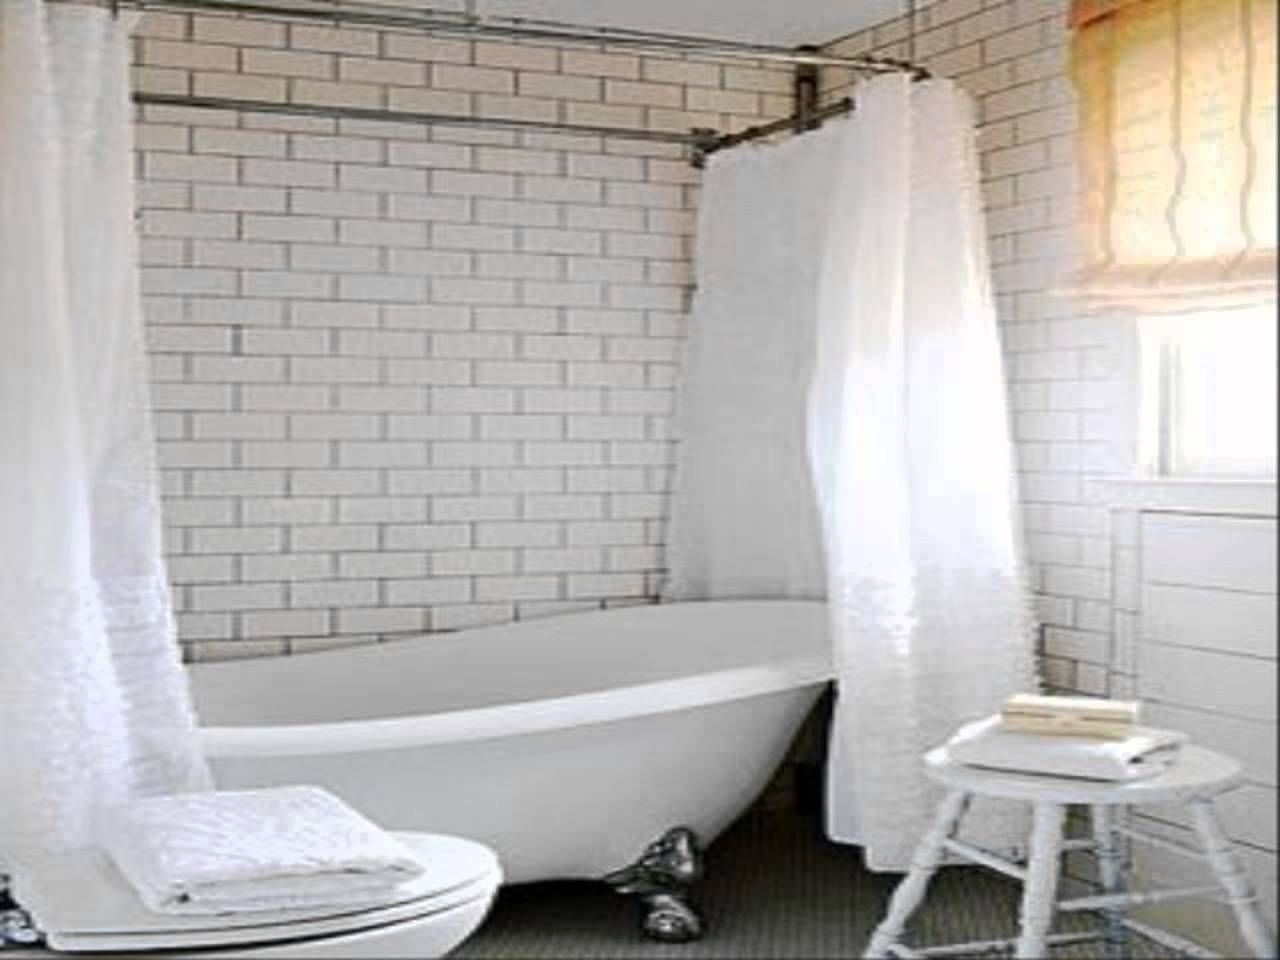 Claw Foot Tub Wall Mounted Shower Curtain Rod Add A Shower With With Shower Curtains For Clawfoot Tubs (View 4 of 25)